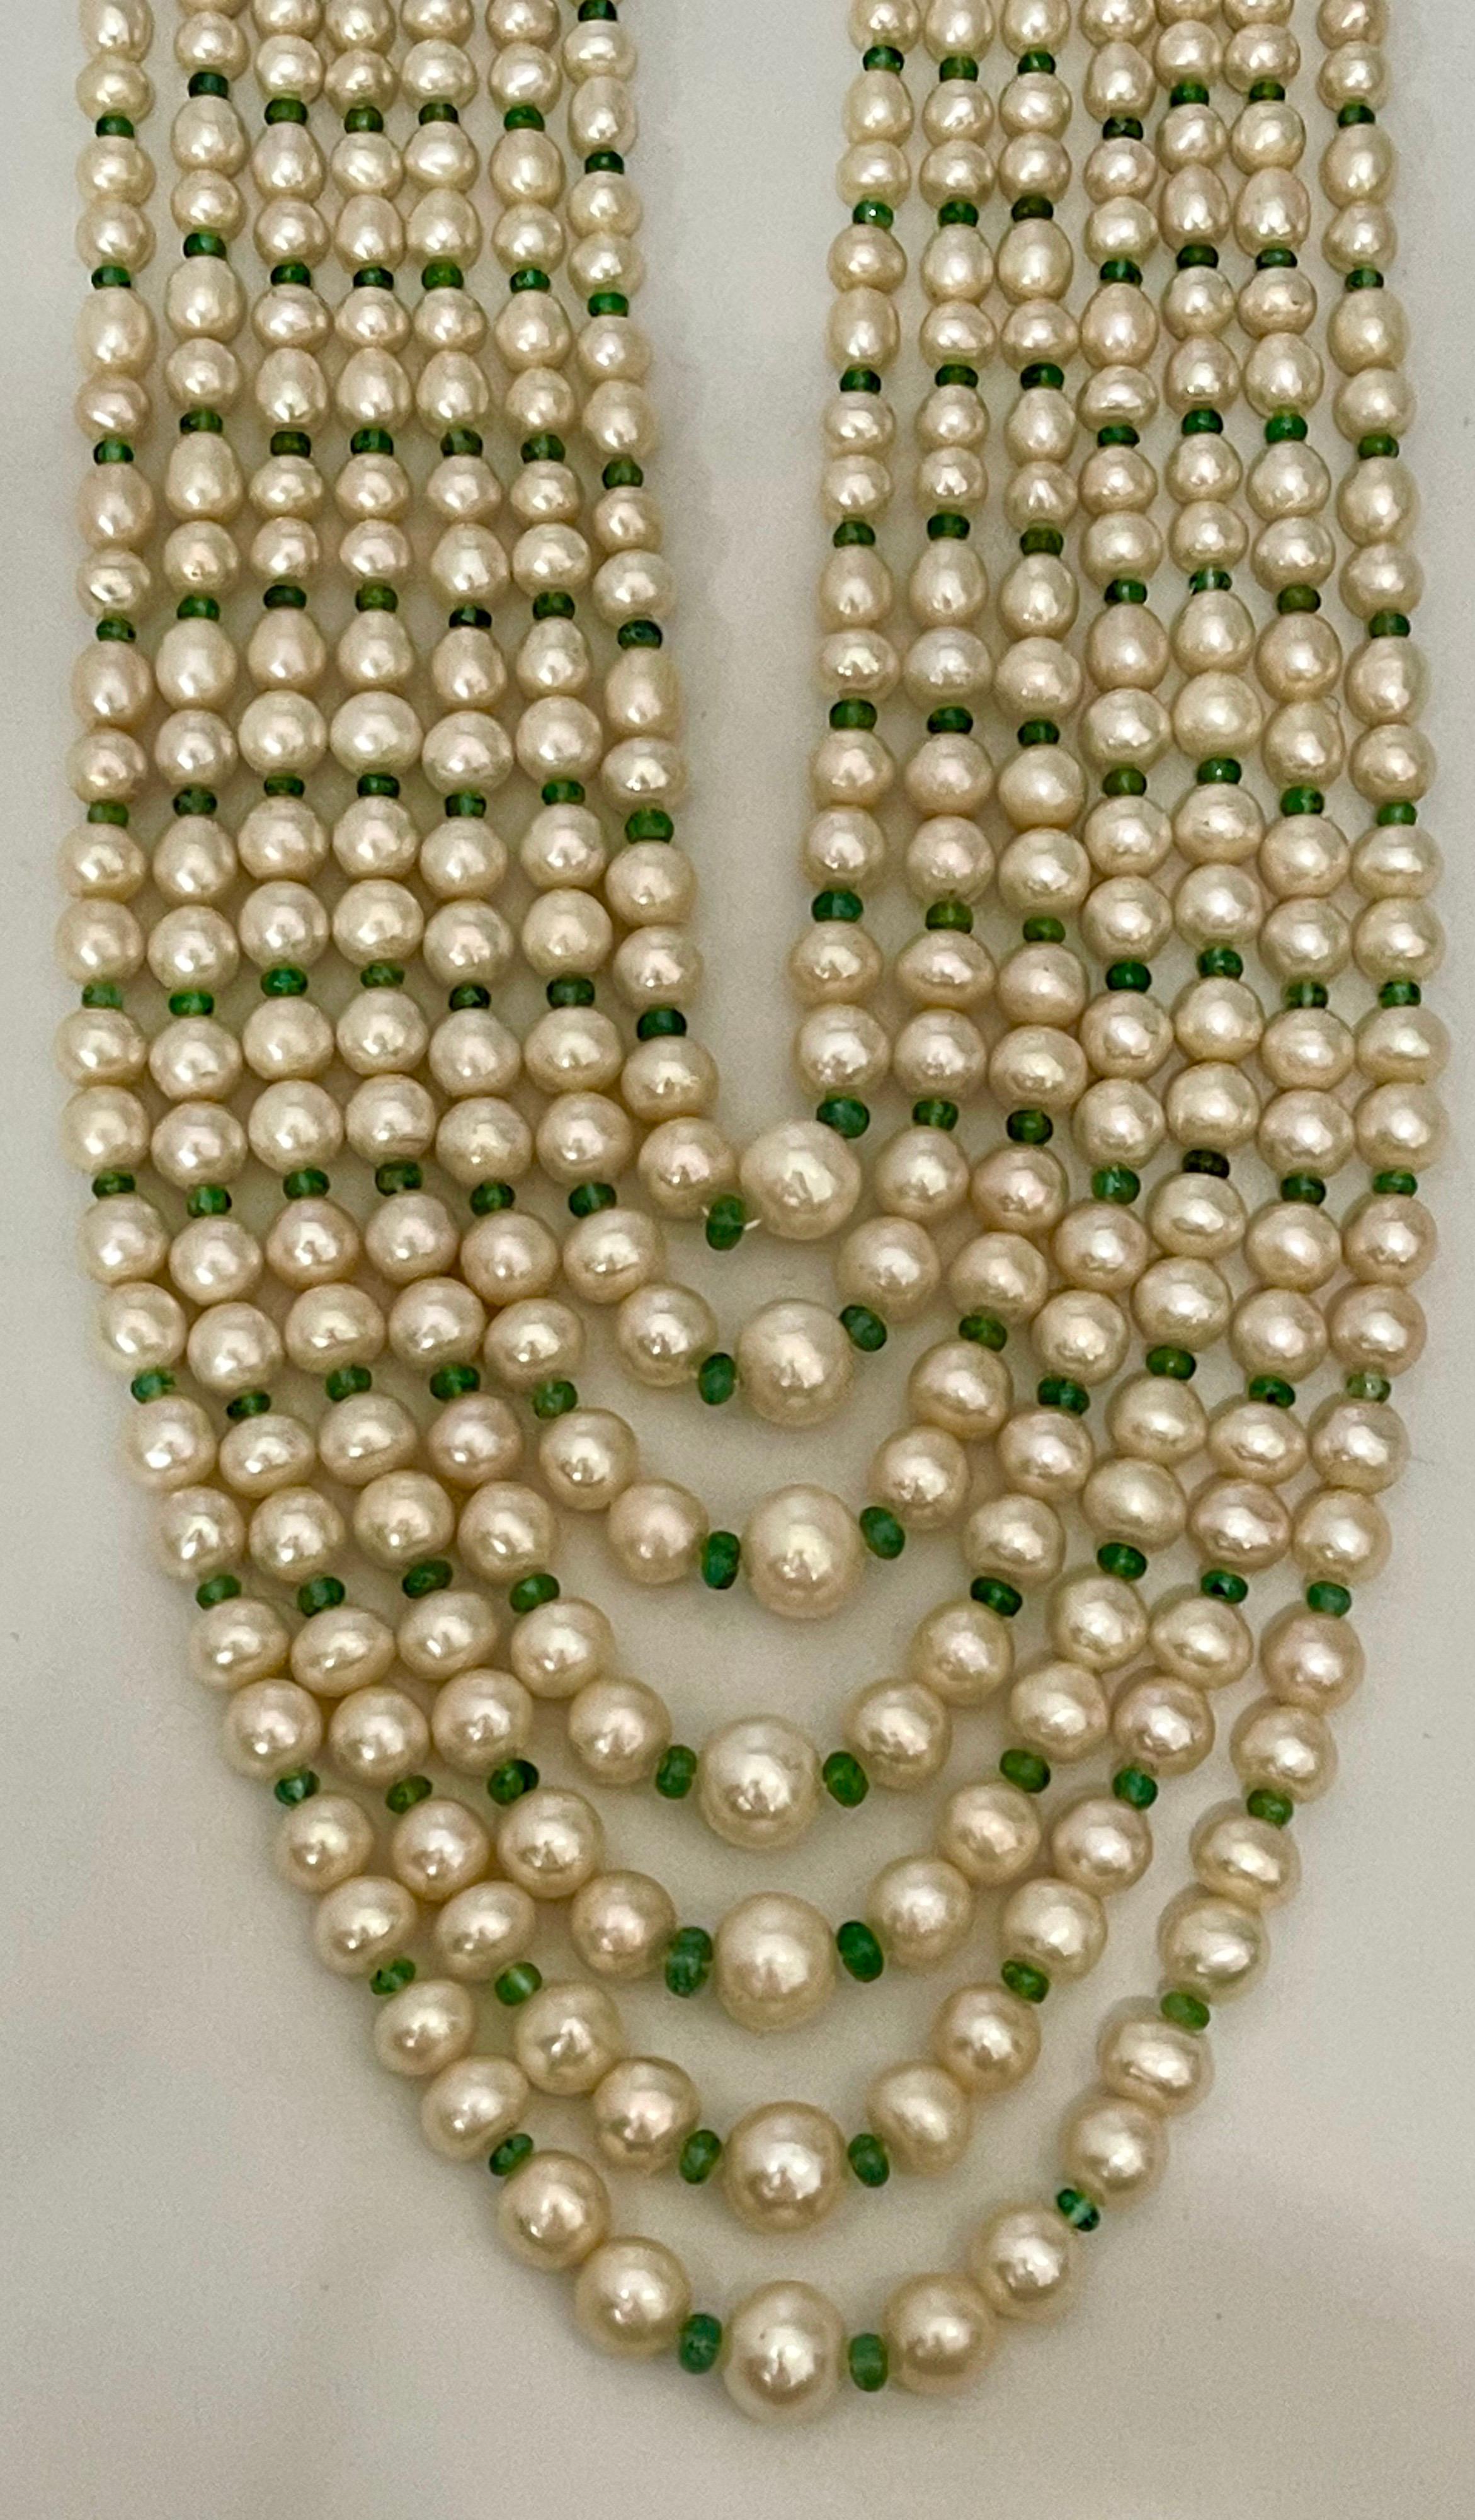 7 layer pearl necklace